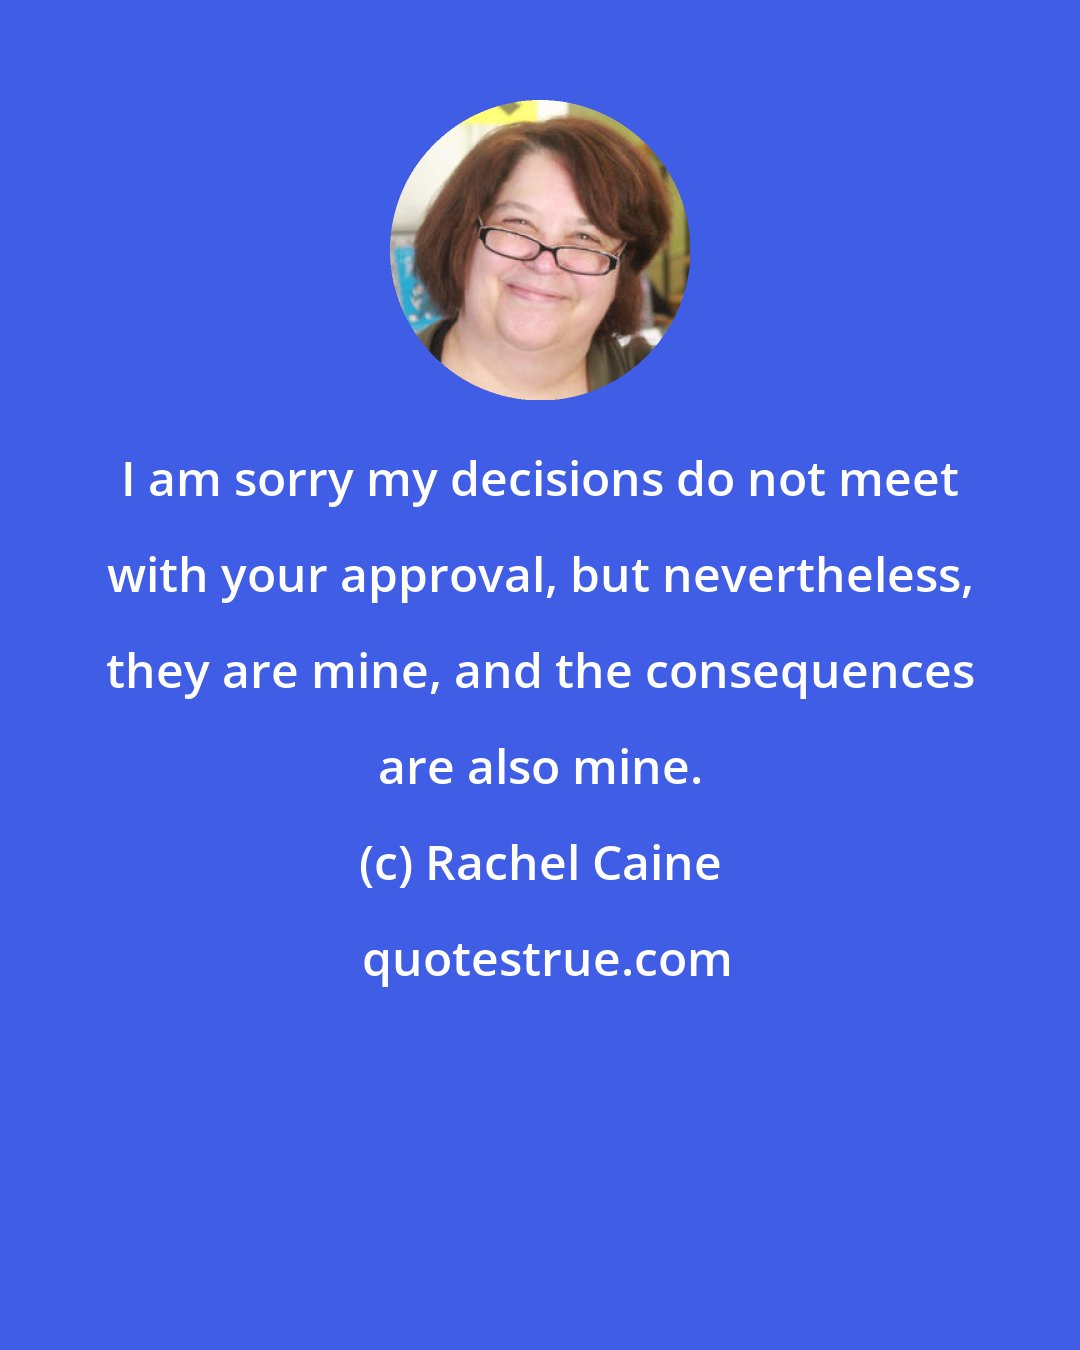 Rachel Caine: I am sorry my decisions do not meet with your approval, but nevertheless, they are mine, and the consequences are also mine.